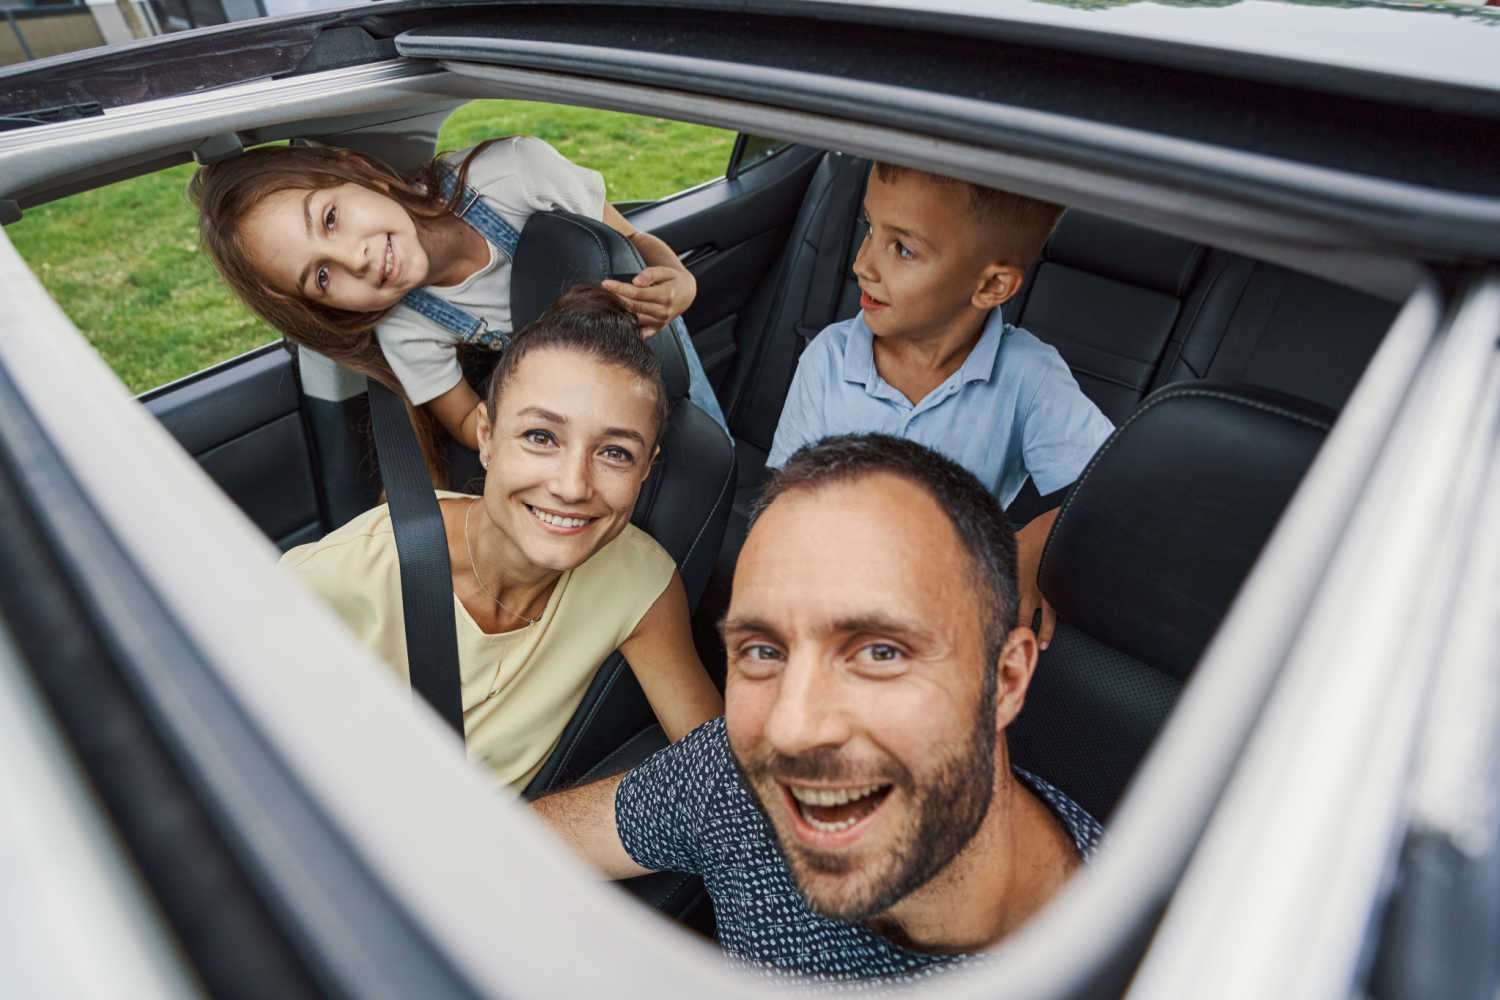 Safety For Children While Using Cars With Sunroofs by Dr. Chetan Ginigeri